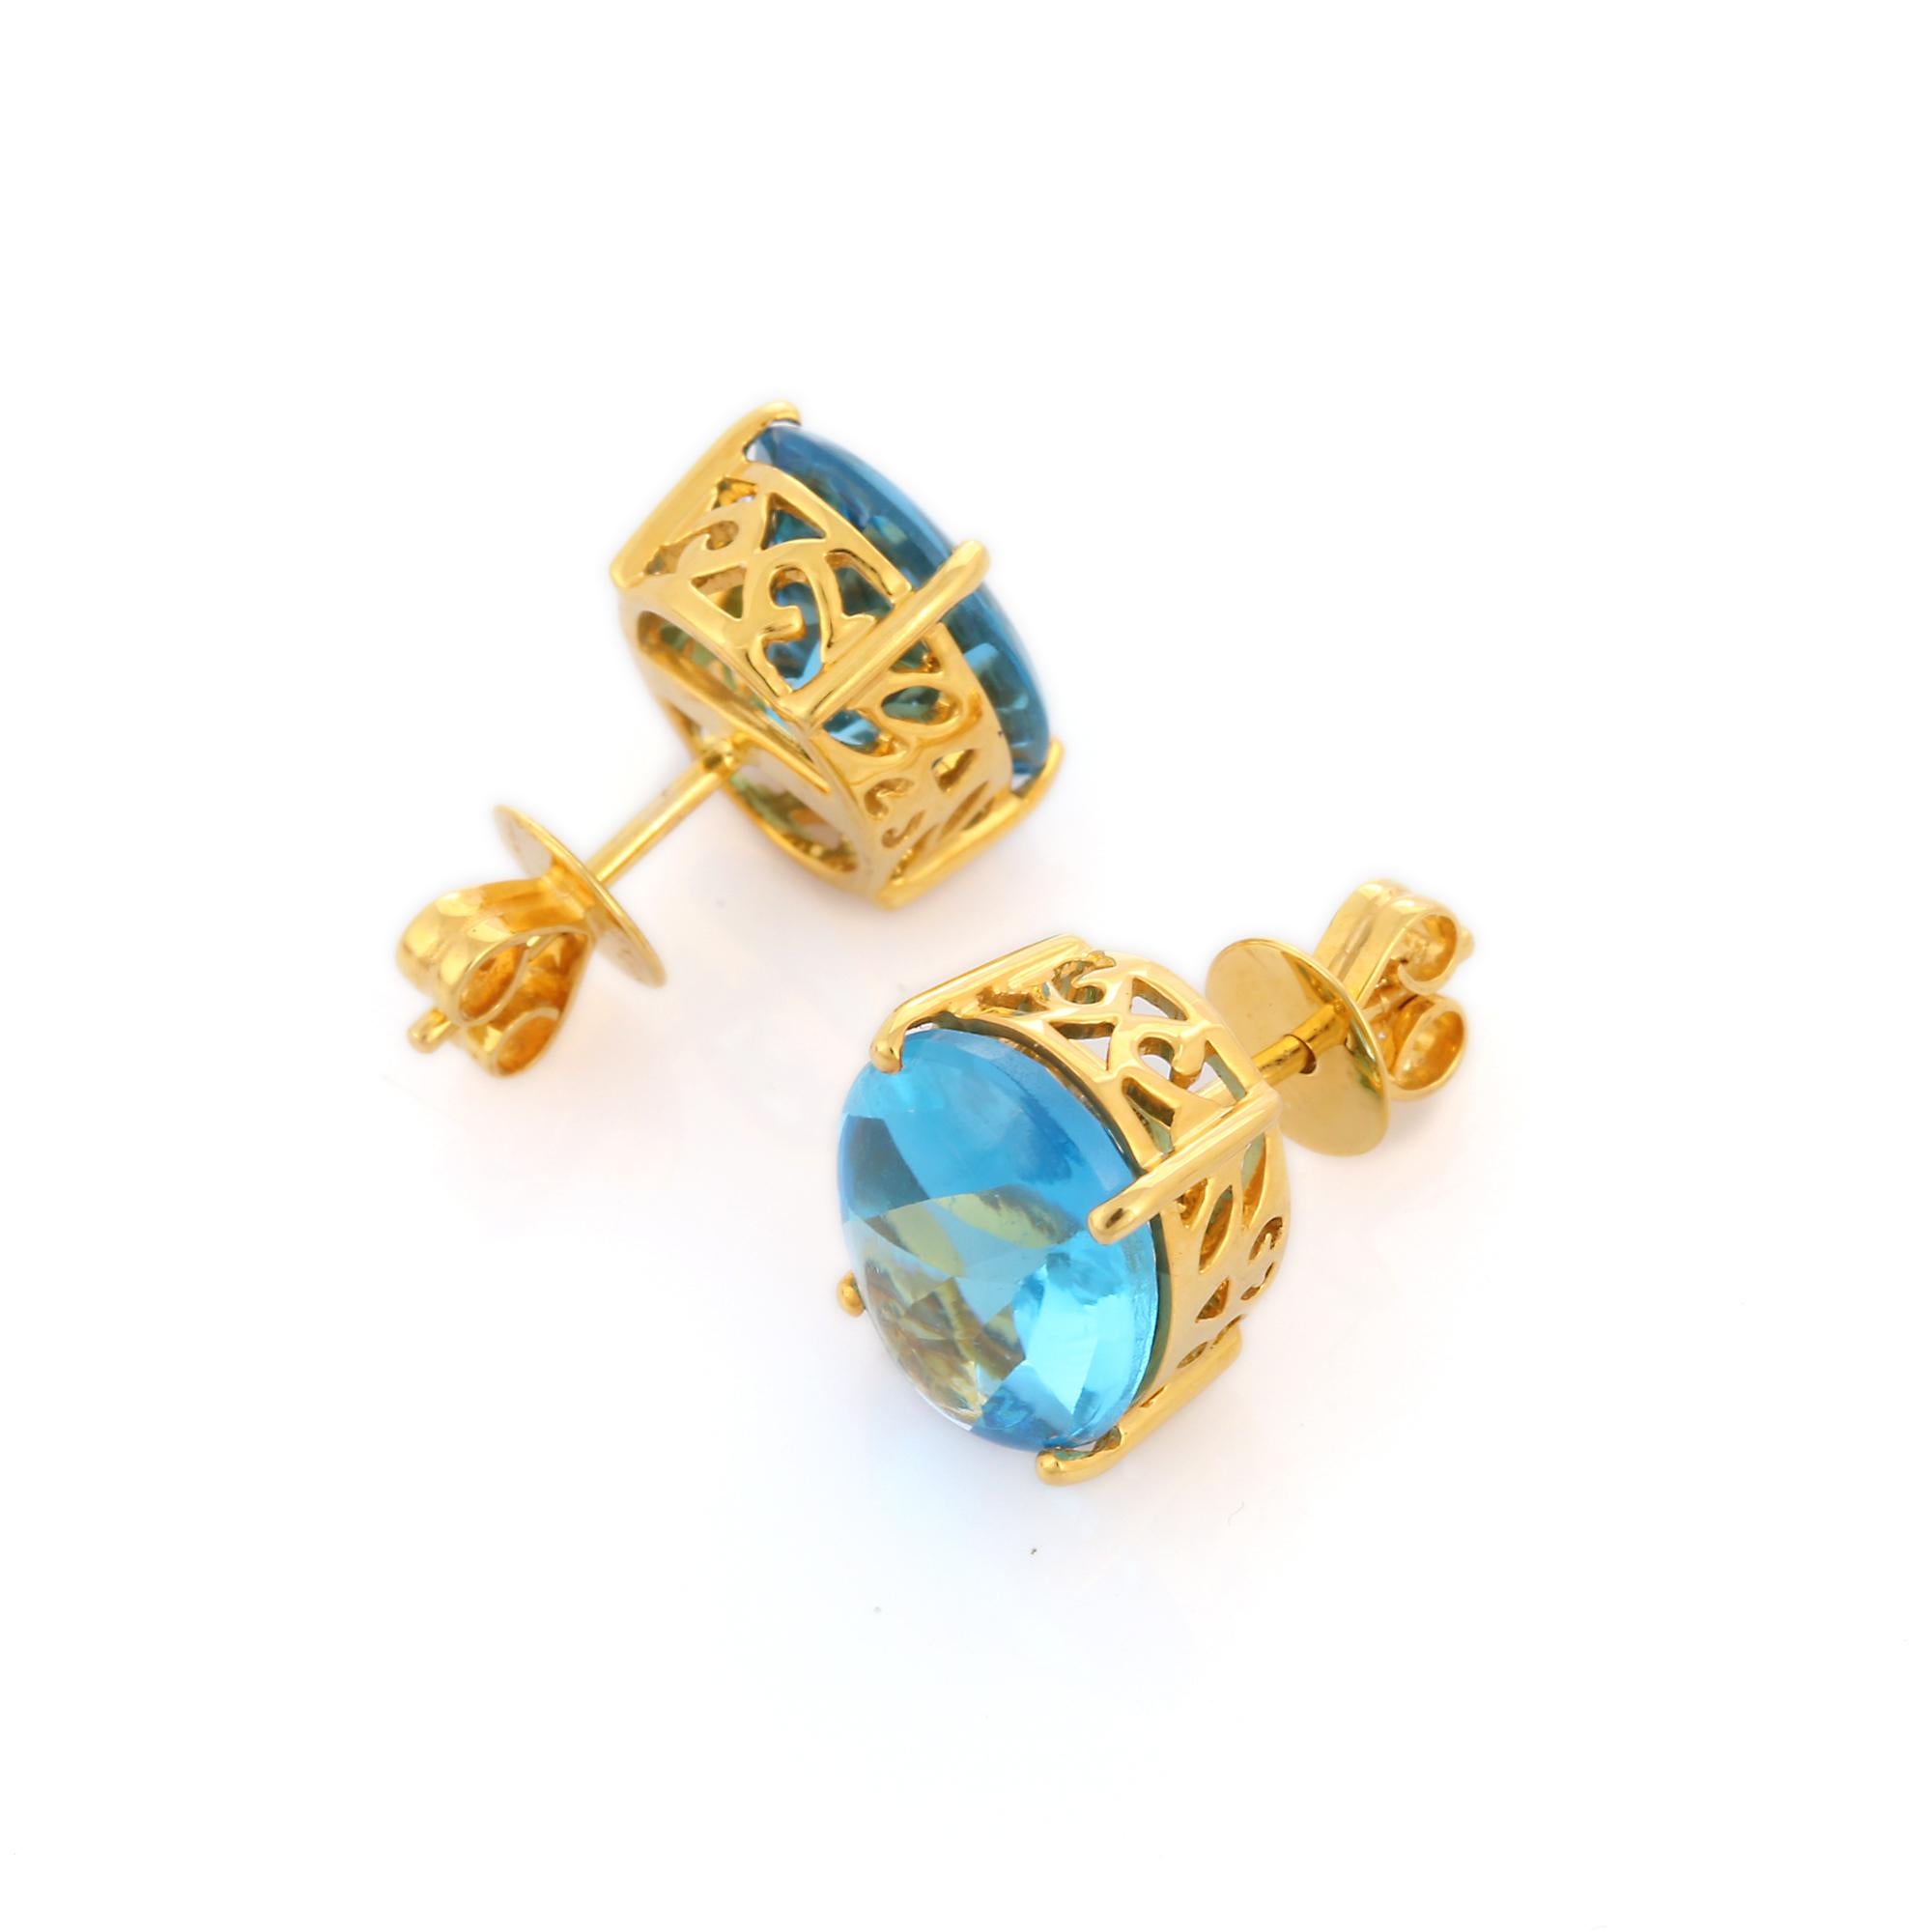 Oval Cut Art Deco Style 10.10 Ct Blue Topaz Stud Earrings in 18K Yellow Gold In New Condition For Sale In Houston, TX